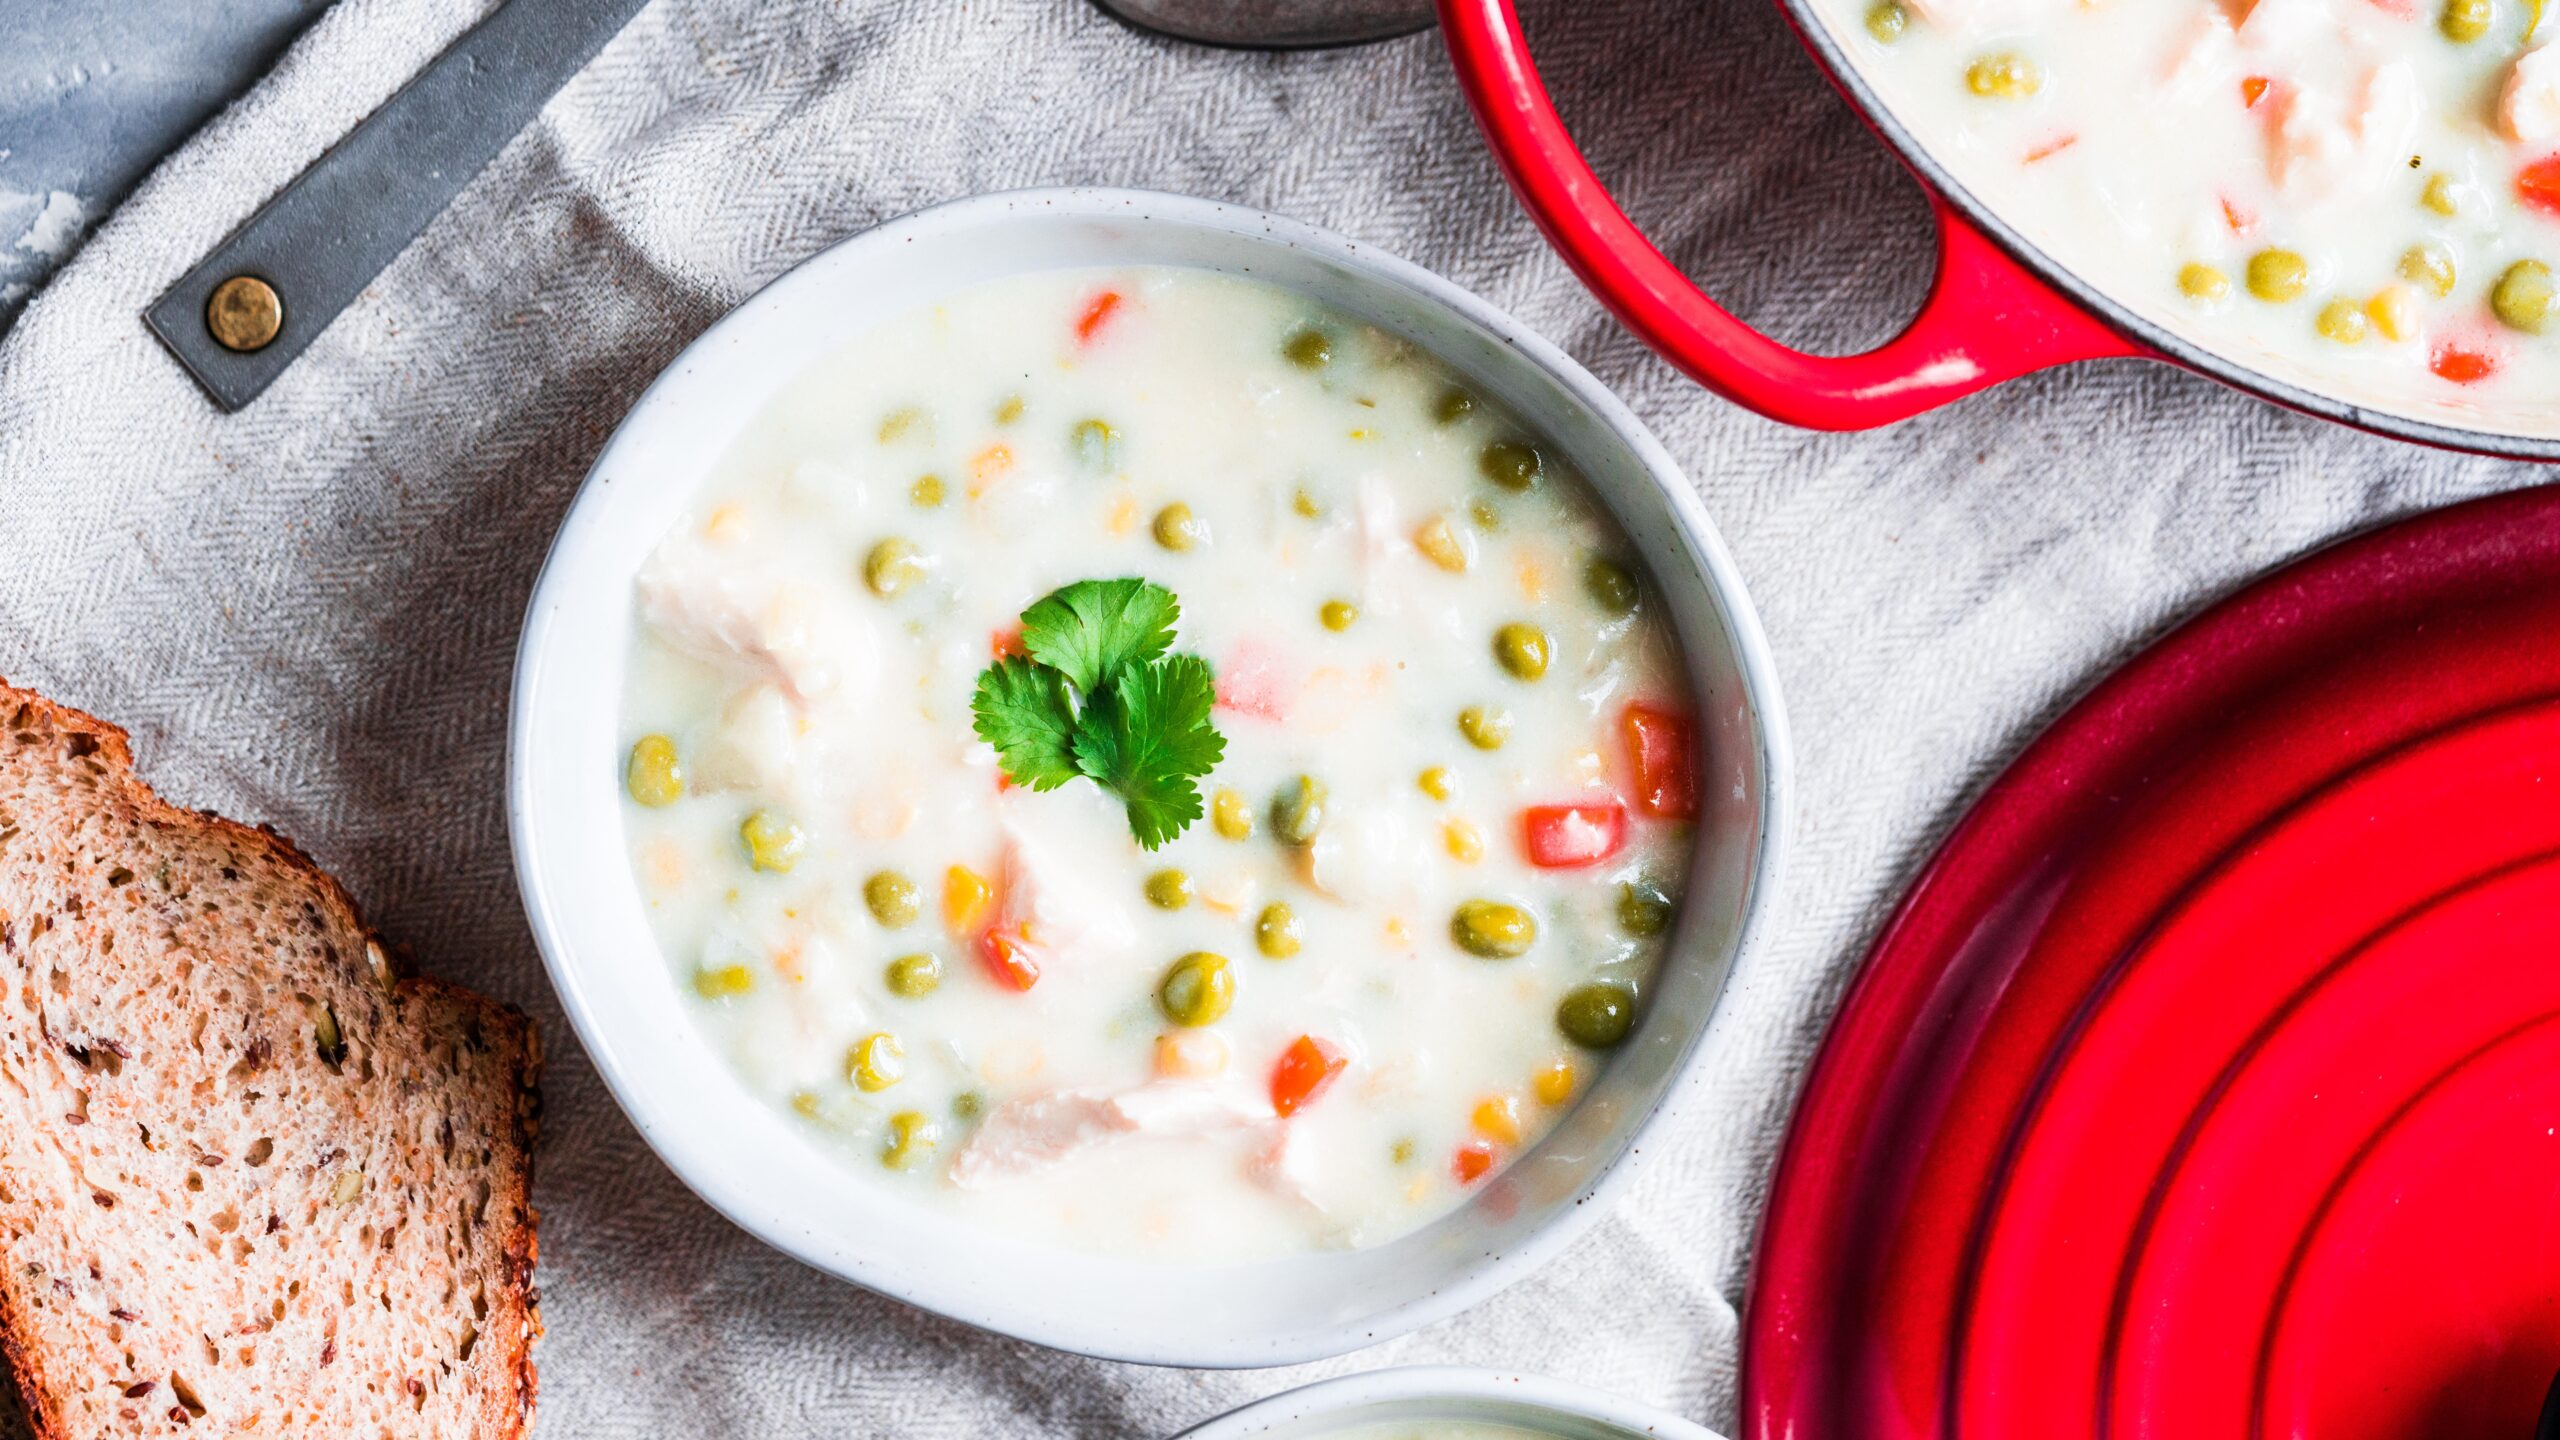  With the Instant Pot, you can have a delicious bowl of chowder on the table in no time.